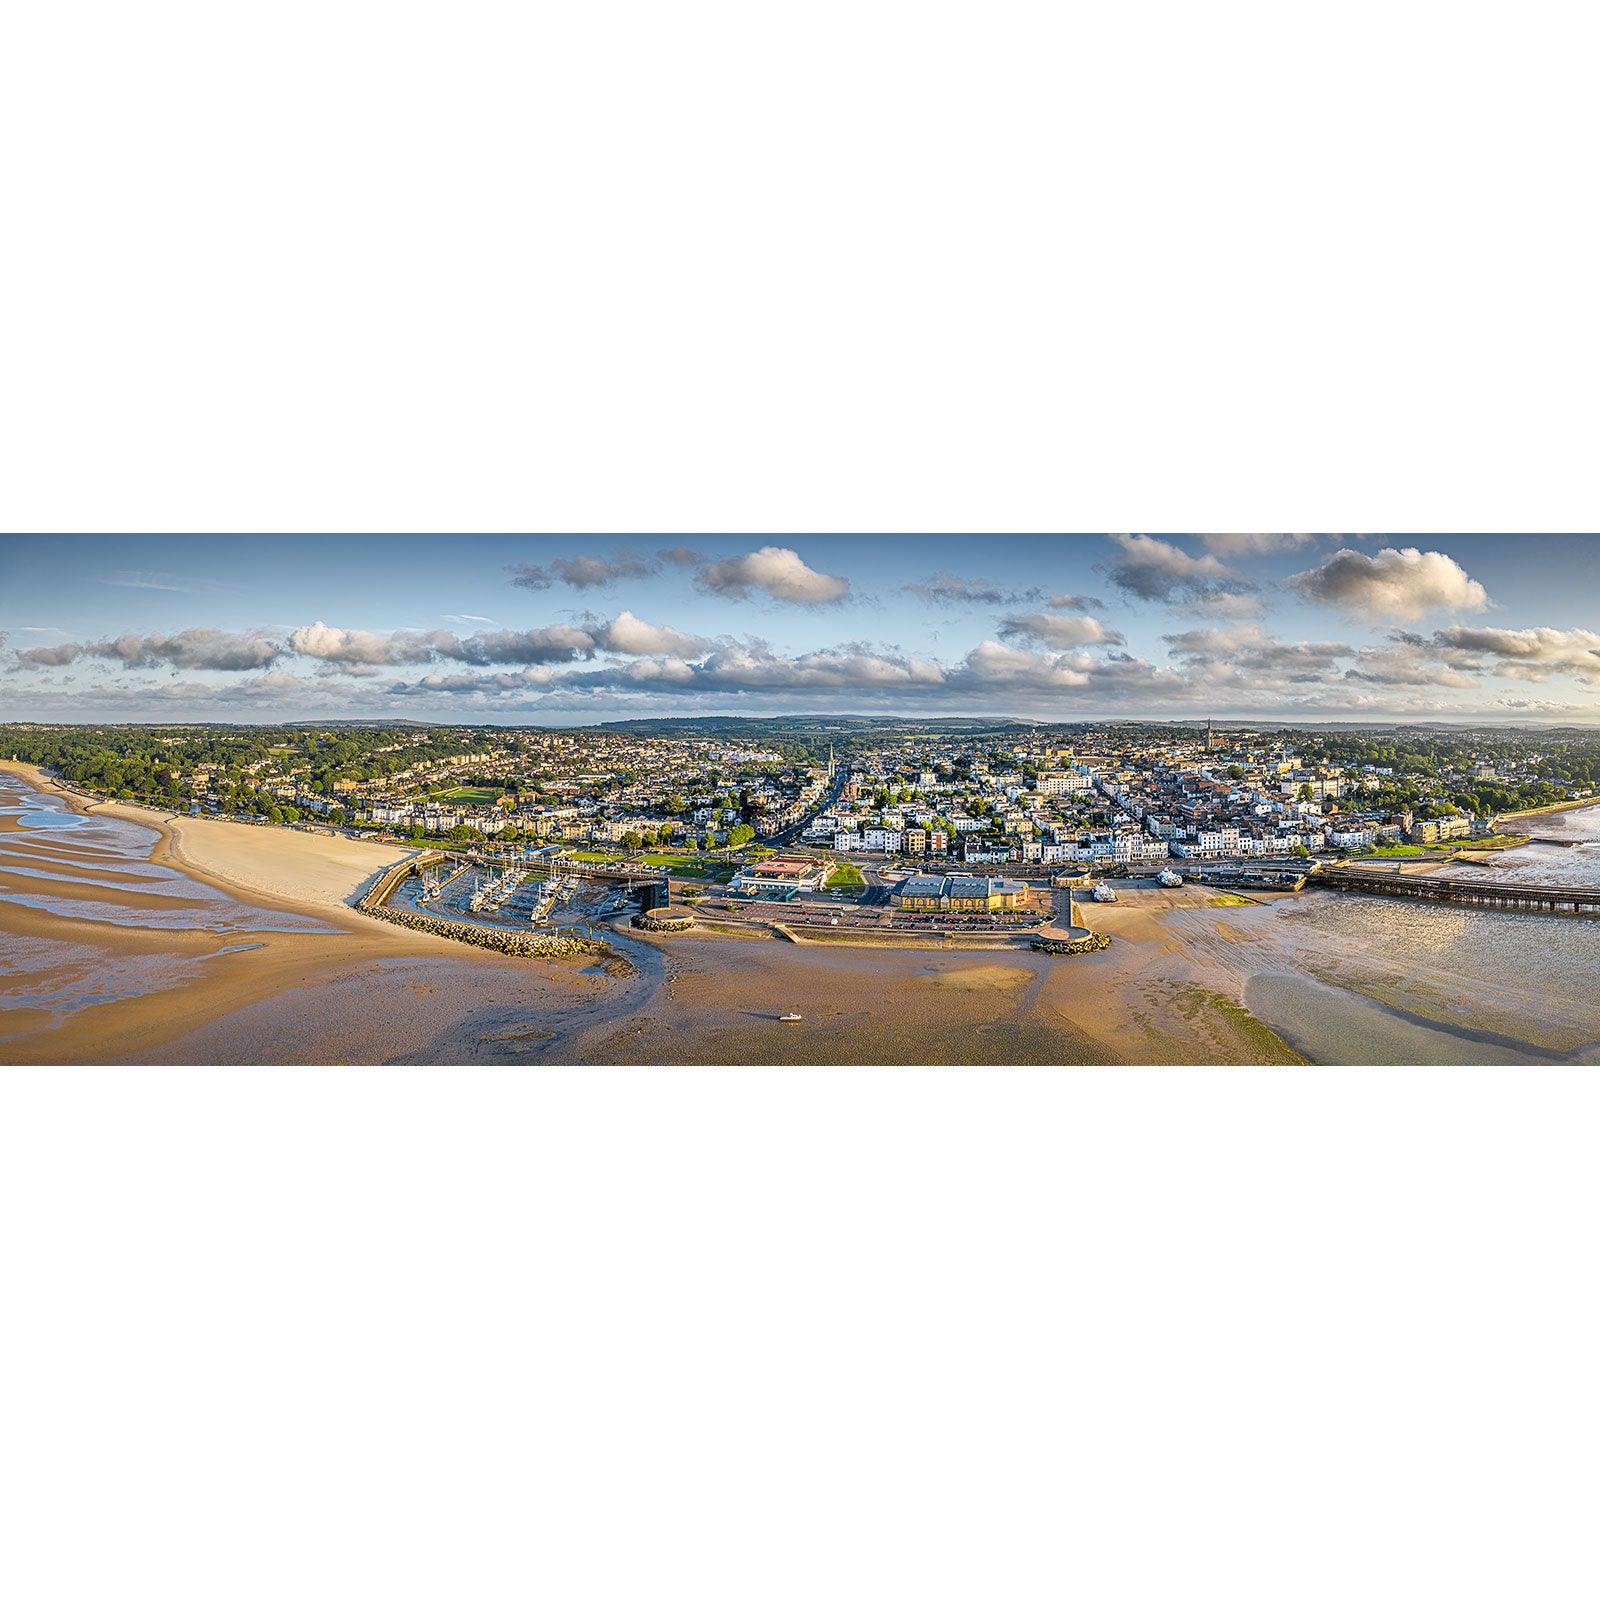 A panoramic aerial view of Ryde, a coastal town on the Isle of Wight, with sandy beaches and a pier, under a partly cloudy sky. Created by Available Light Photography.